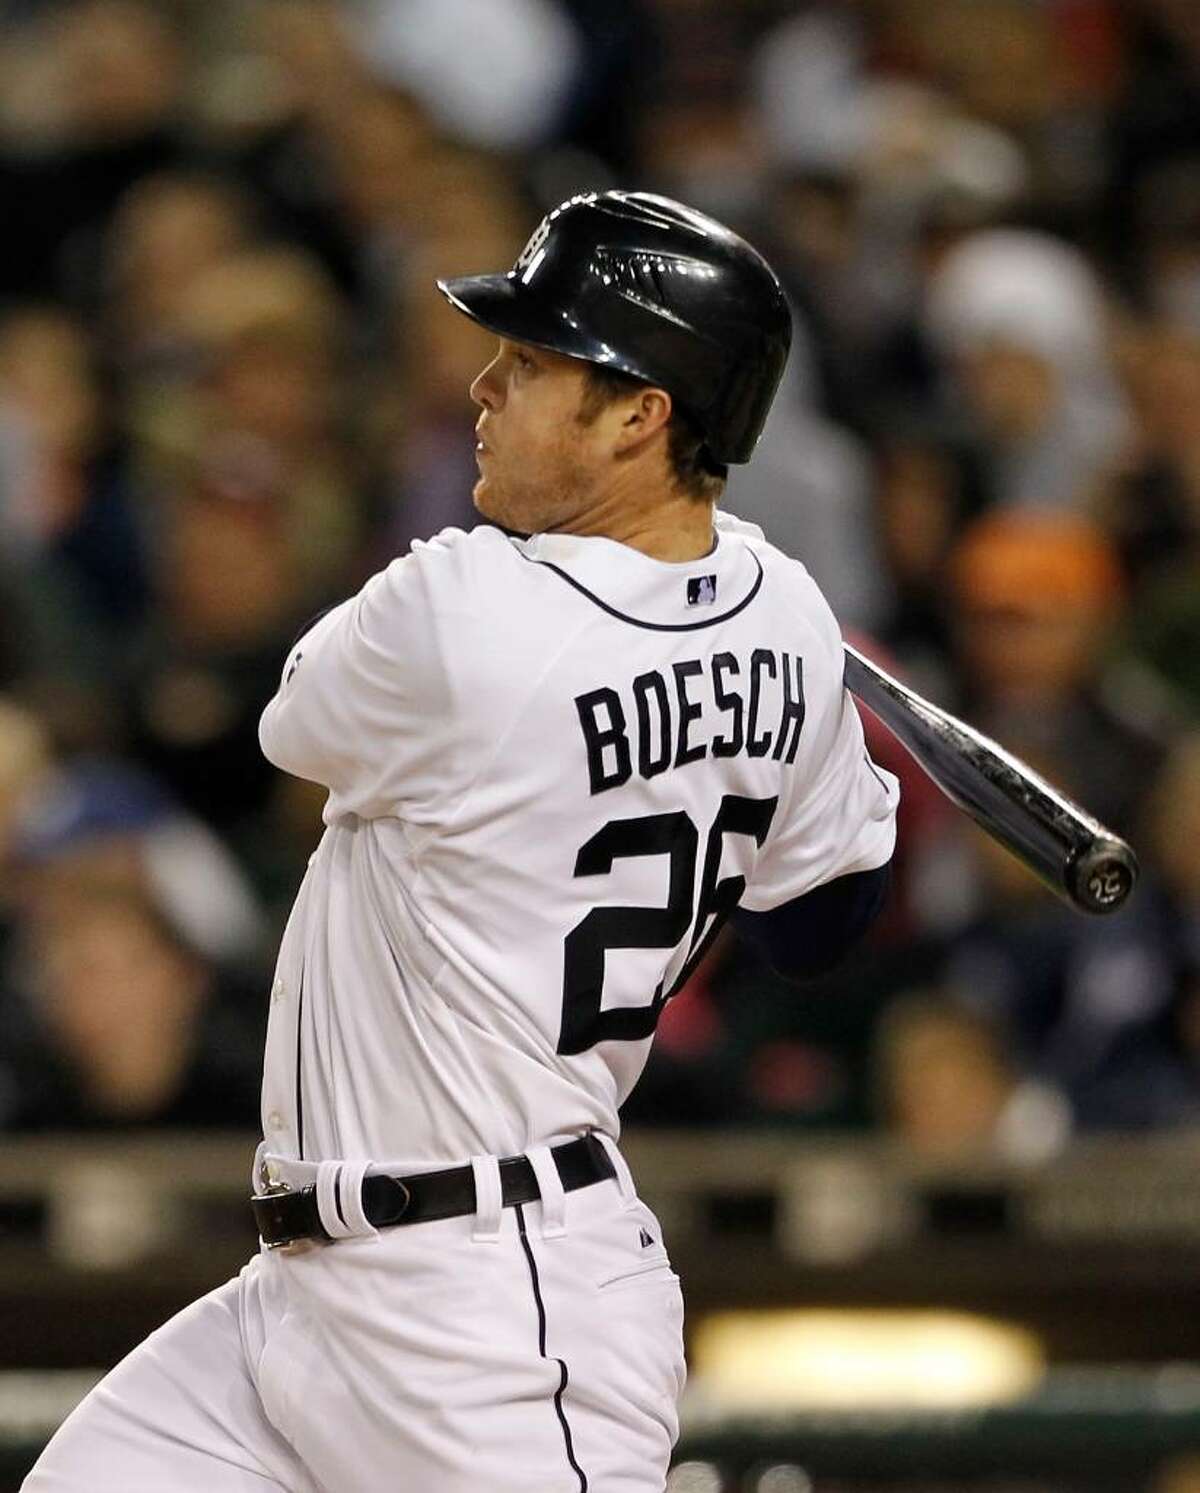 Brennan Boesch is off to such a good start in Detriot the Tigers plan to keep him in the majors when Carlos Guillen. (Photo by Leon Halip/Getty Images)